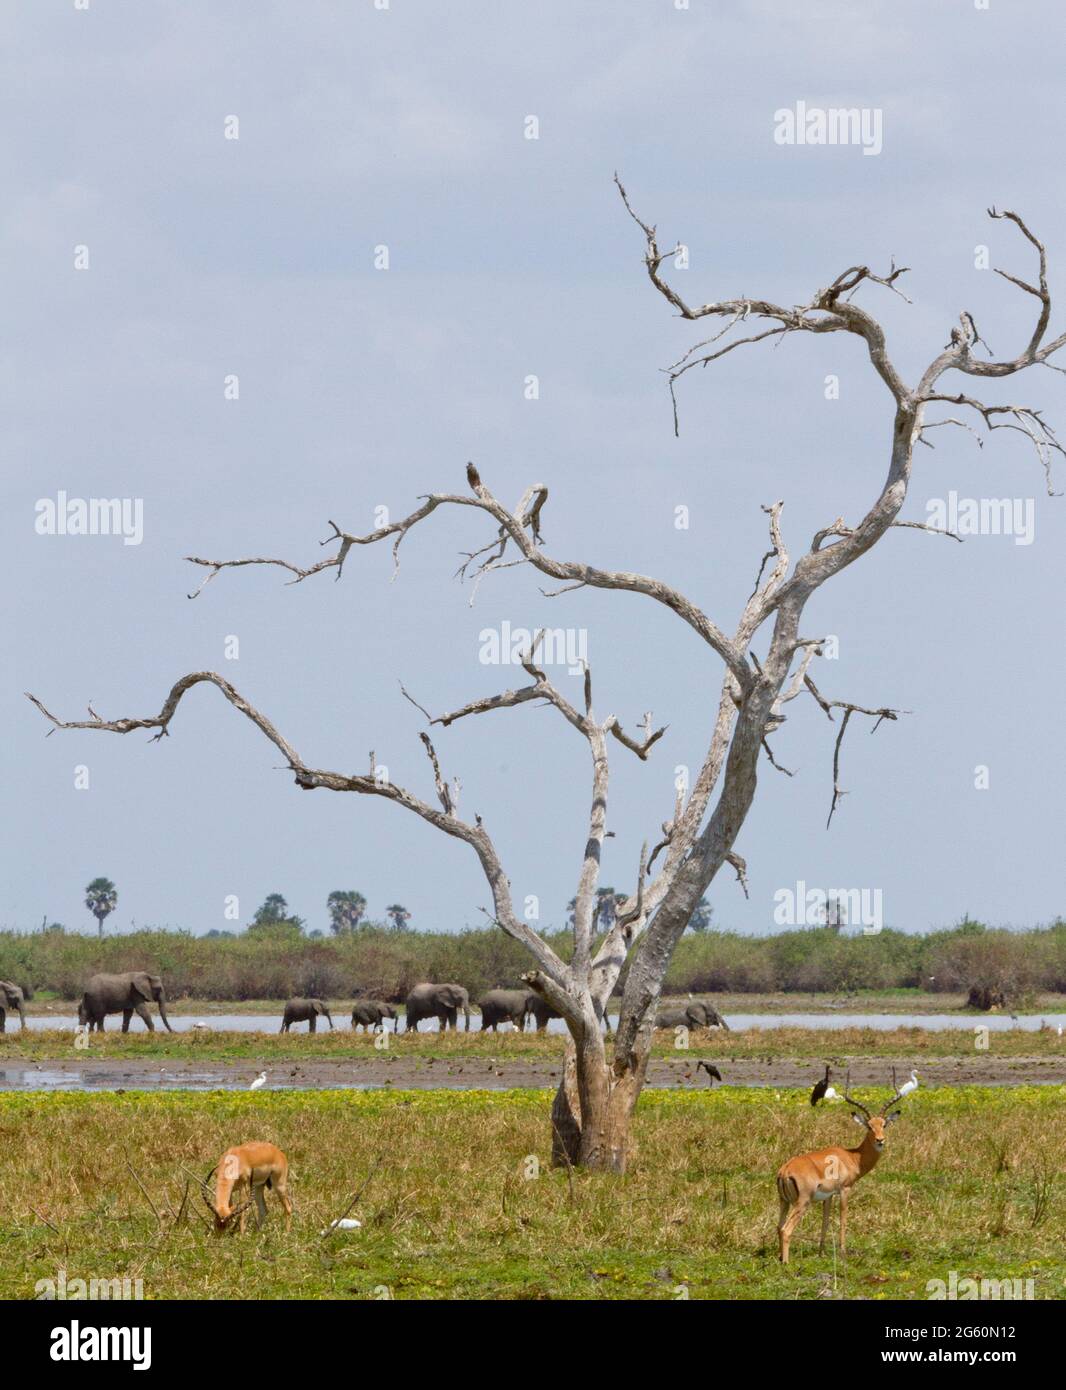 Impala graze in the foreground while elephants walk by behind them. Stock Photo